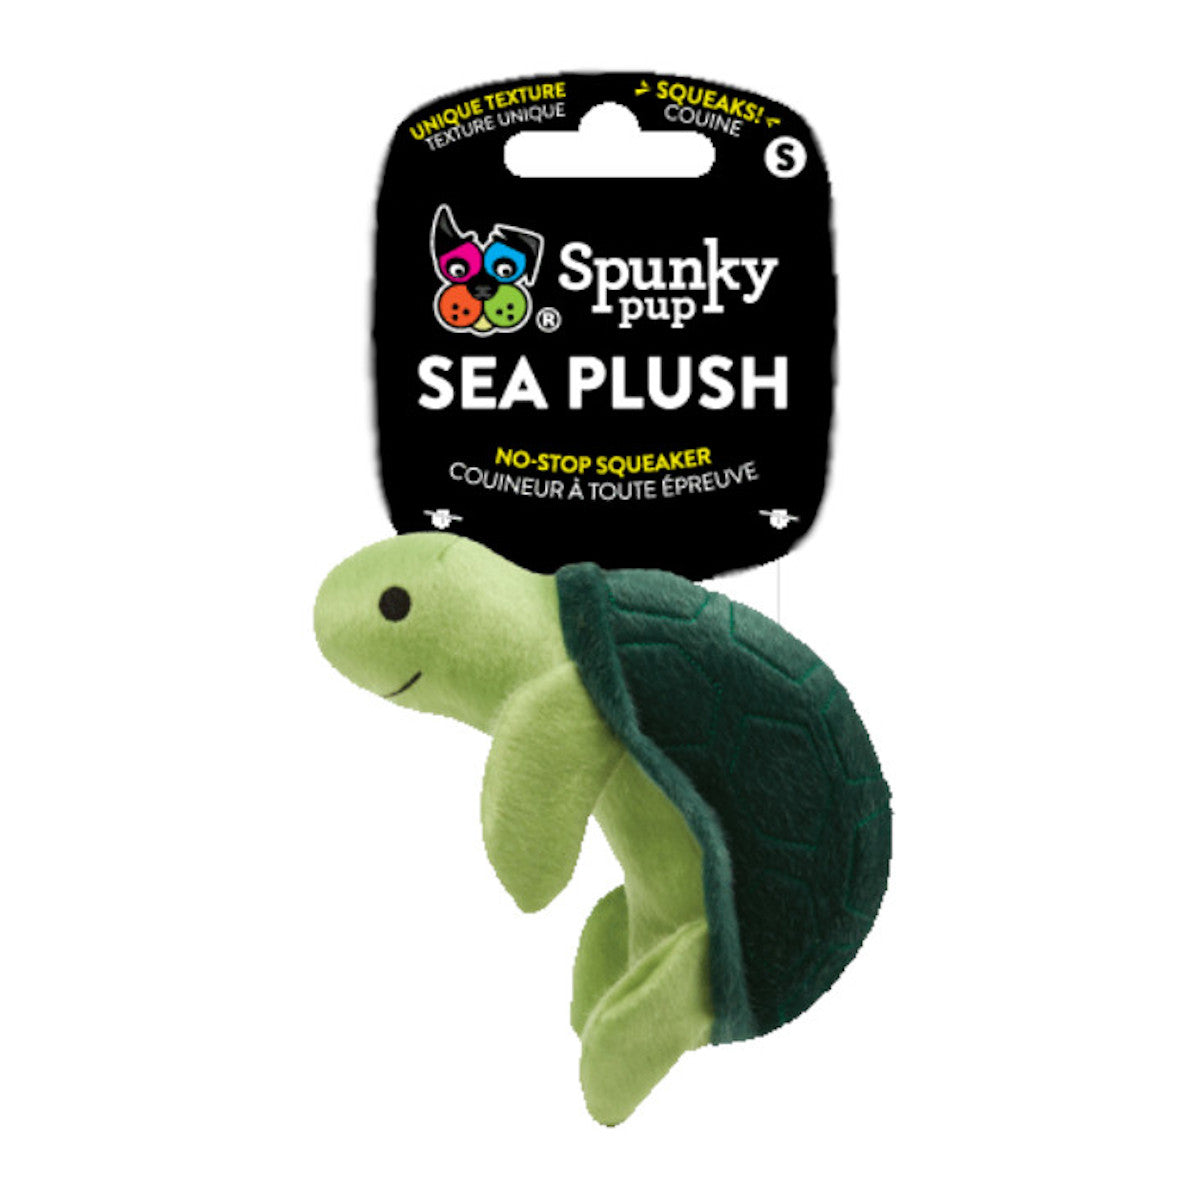 Spunky Pup Sea Plush Turtle Dog Toy, with Squeaker, Size Small.